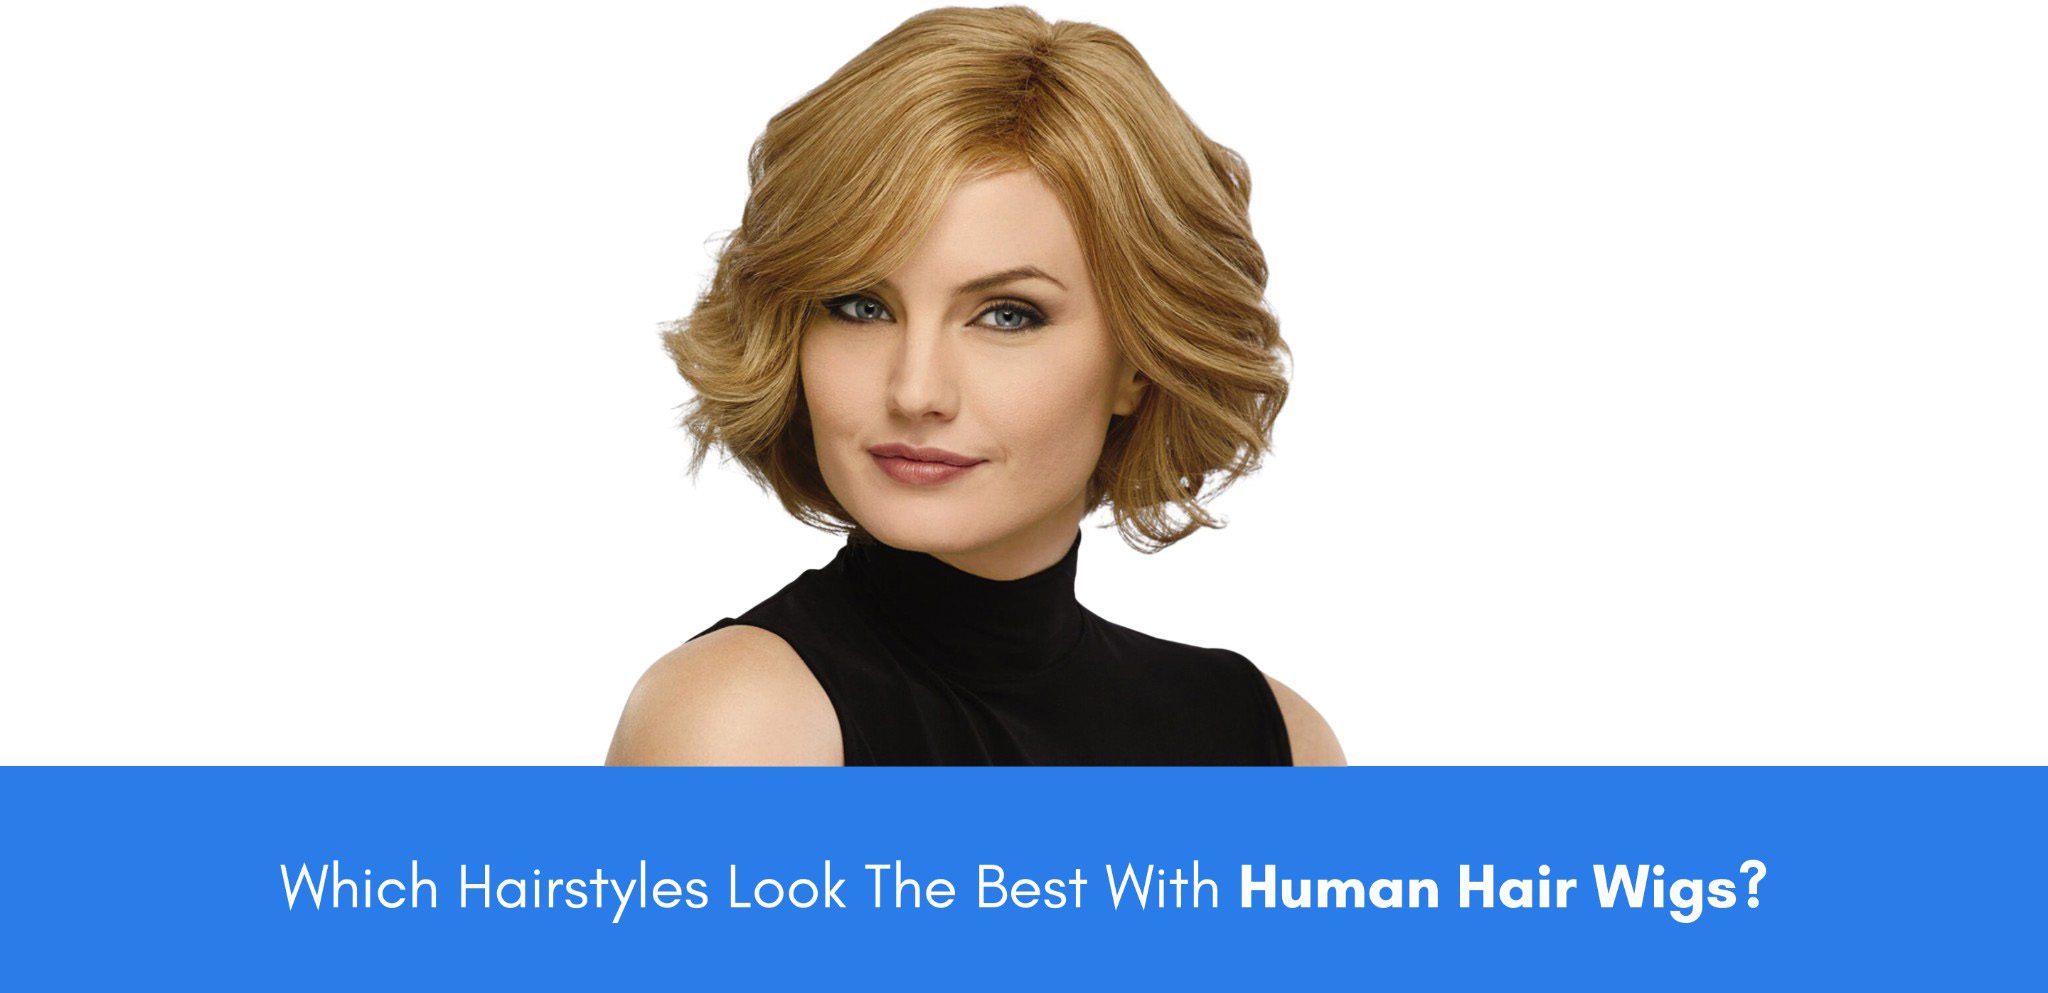 Which Hairstyles Look The Best With Human Hair Wigs?